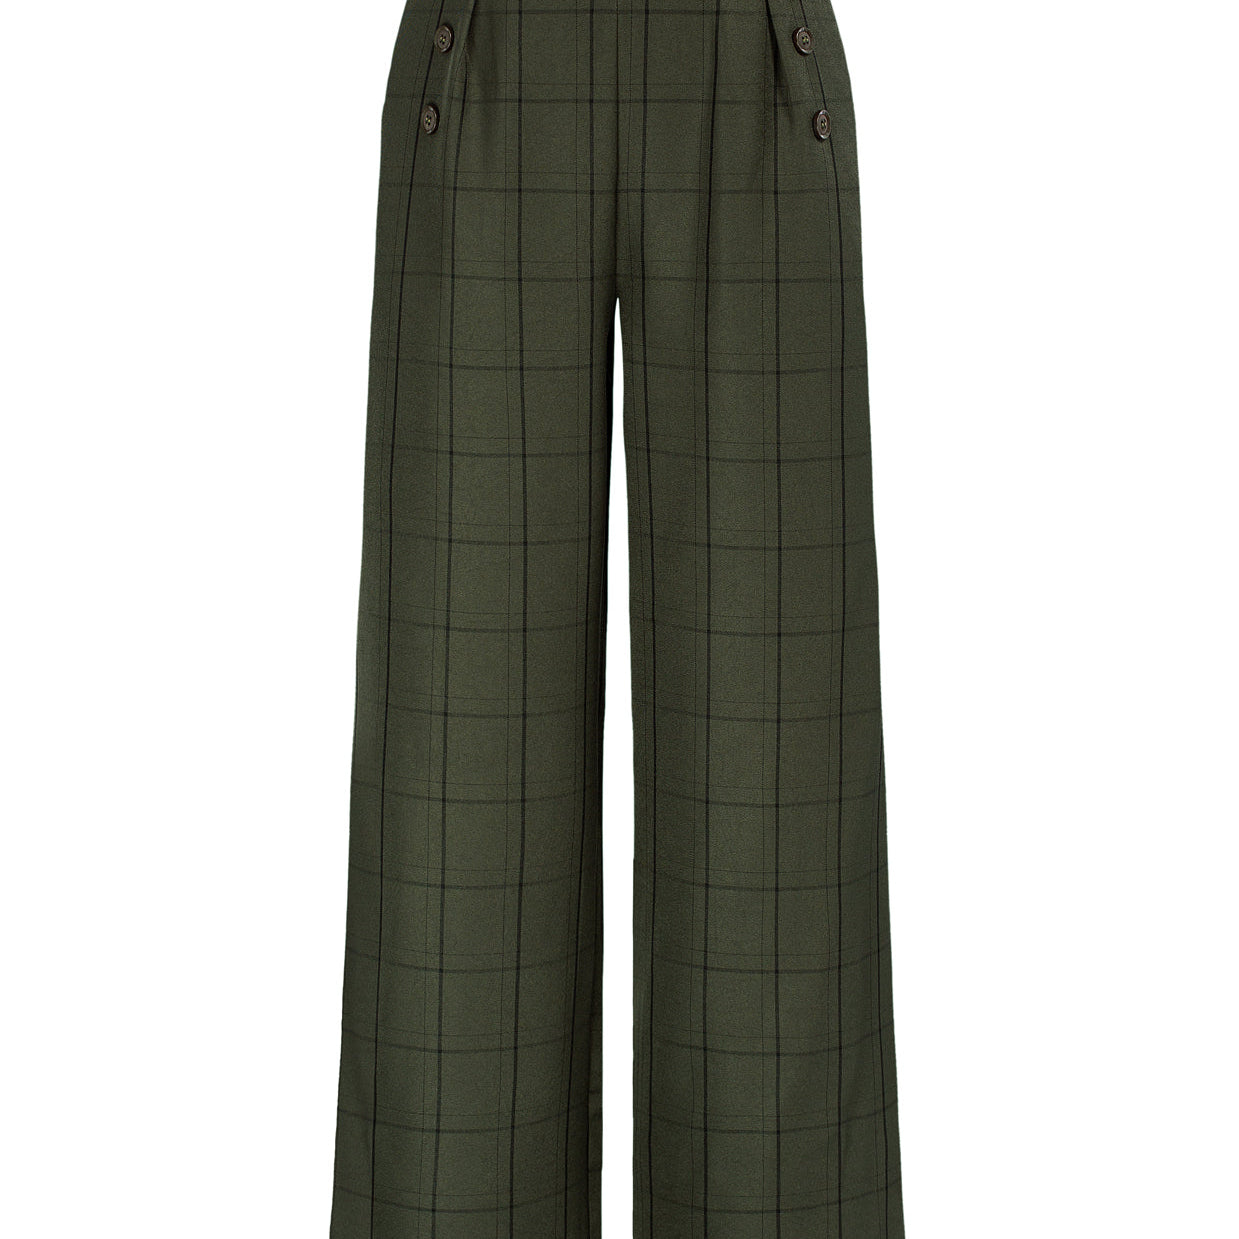 Influencer High Waisted Wide Leg Pants Button Decorated Casual Stretchy Trousers with Pockets